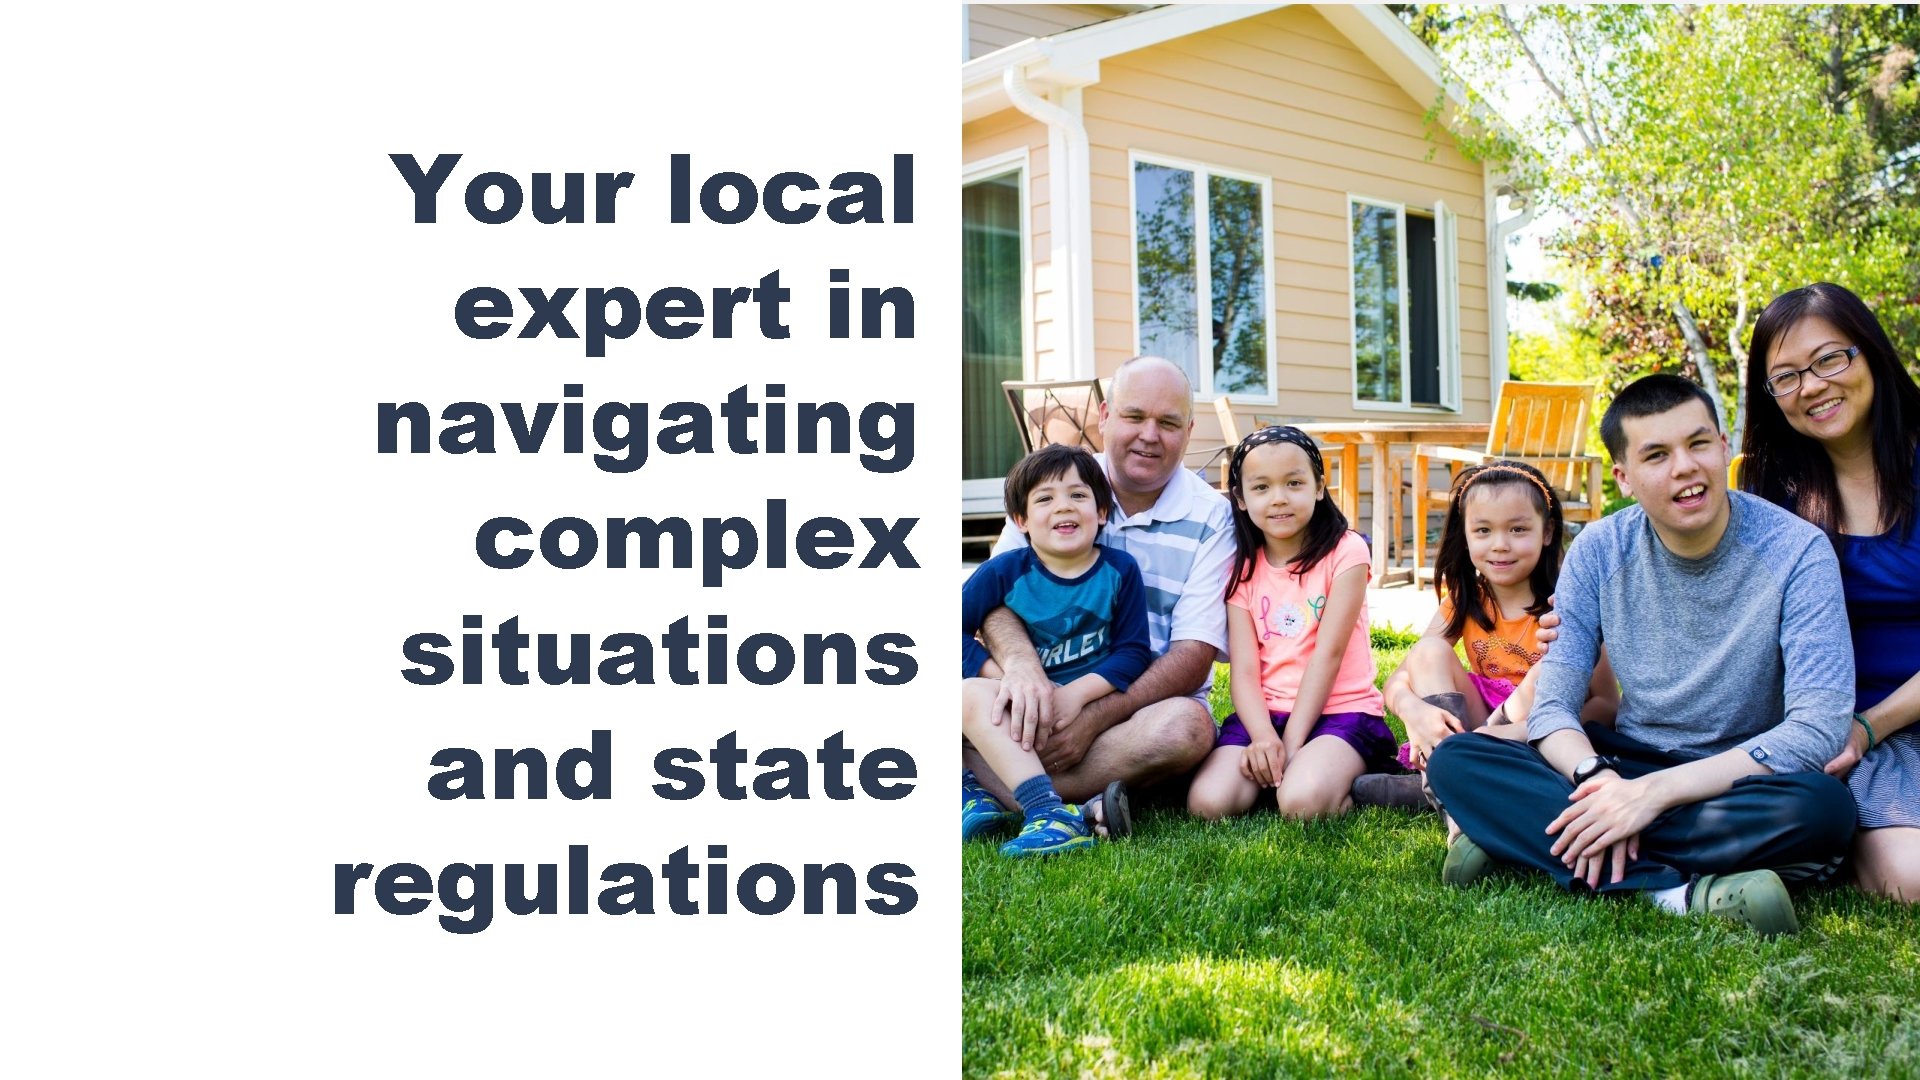 7 Your local expert in navigating complex situations and state regulations 